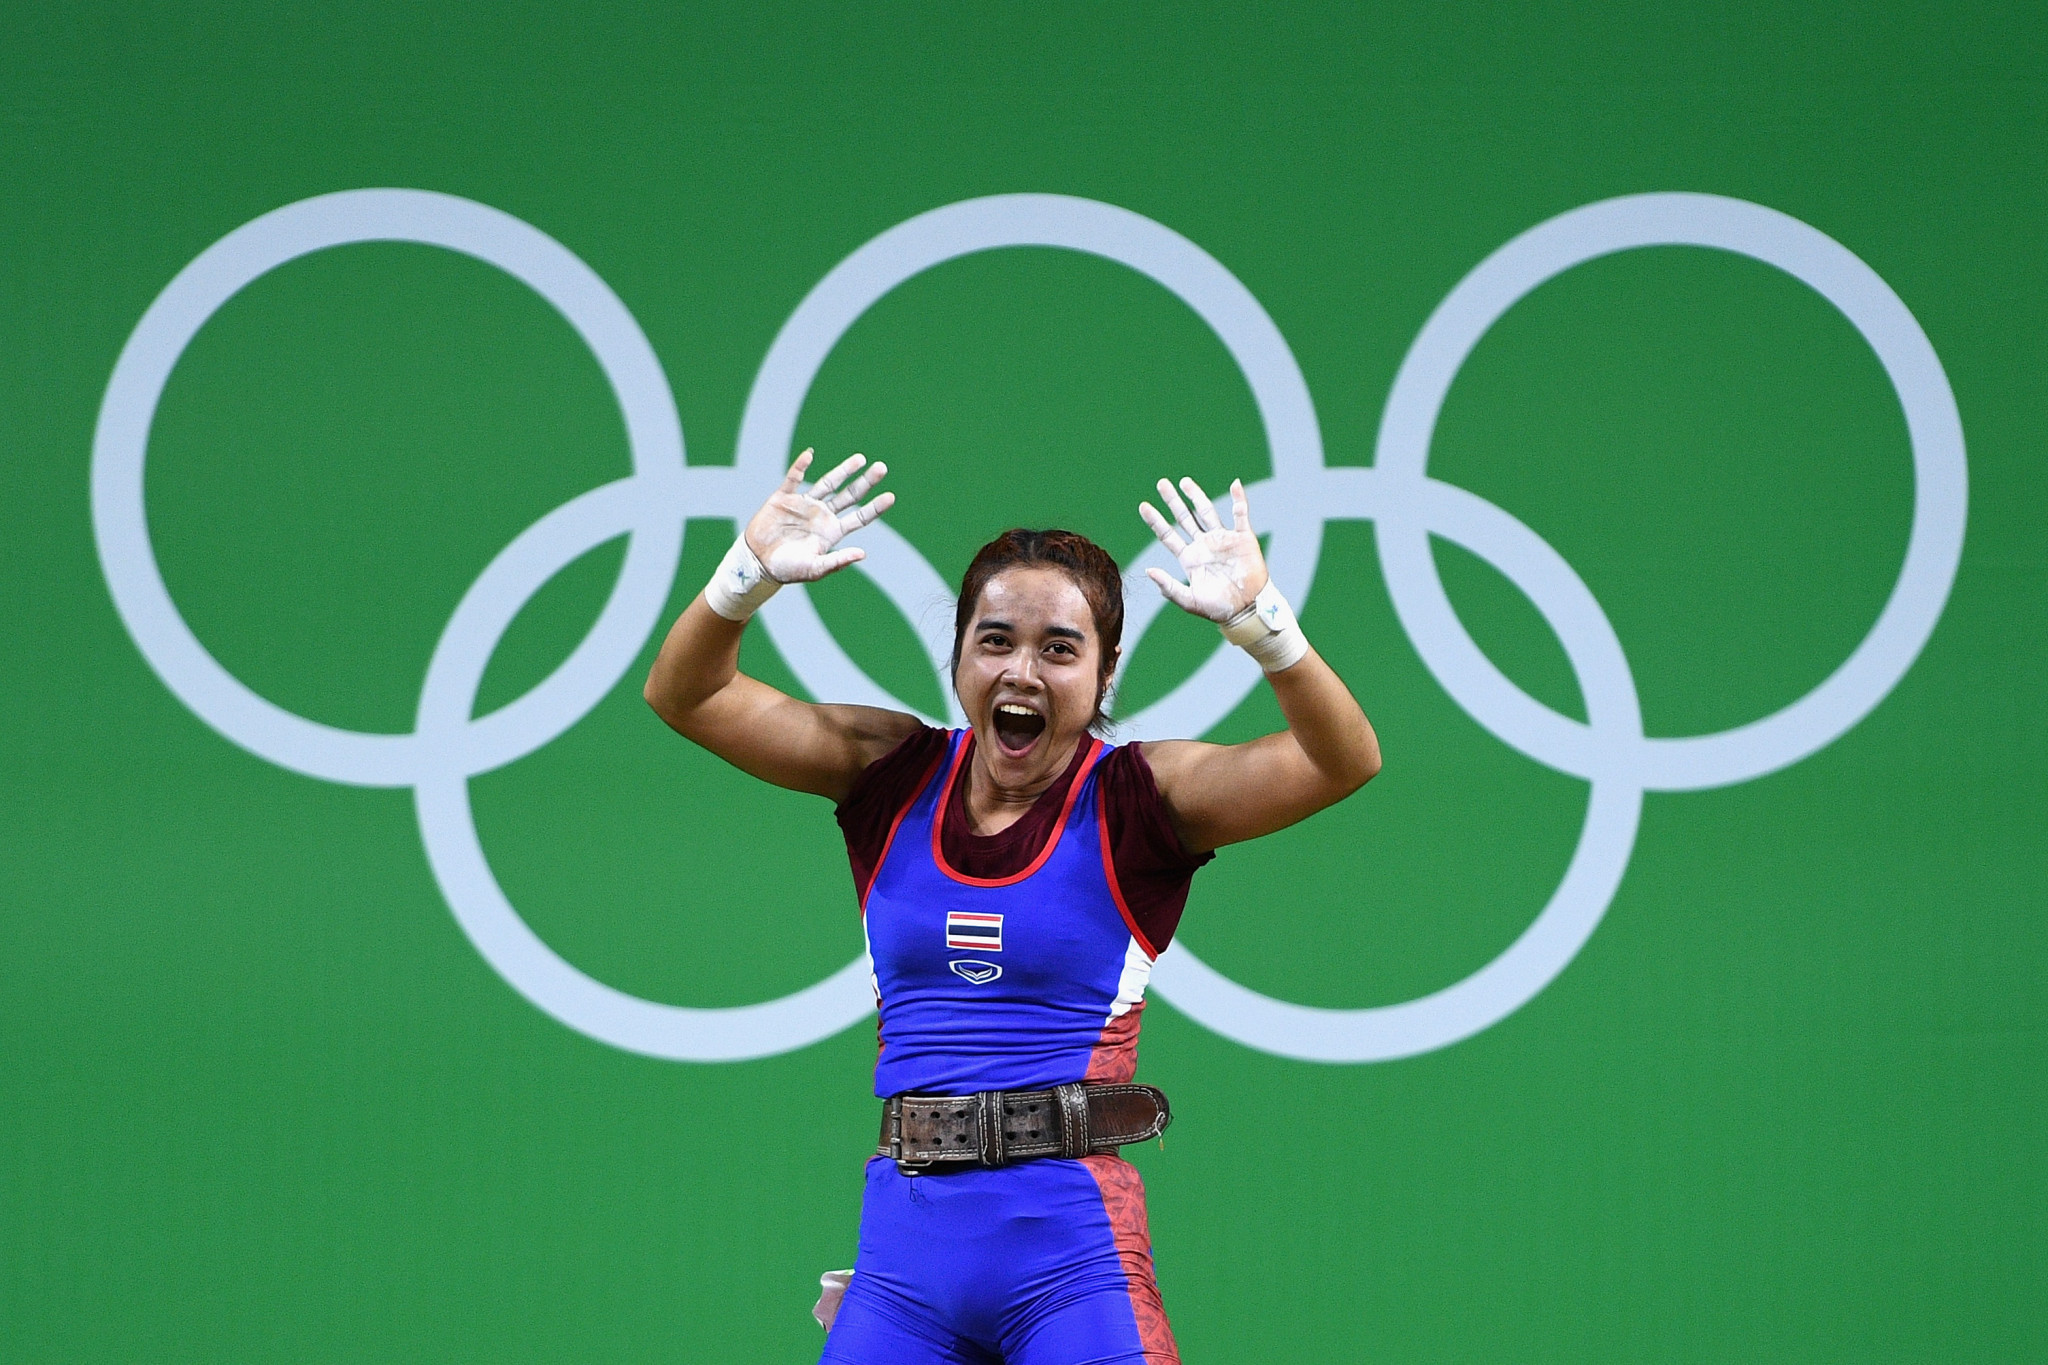 Sopita Tanasan is one of four Thai lifters named by the IWF ©Getty Images